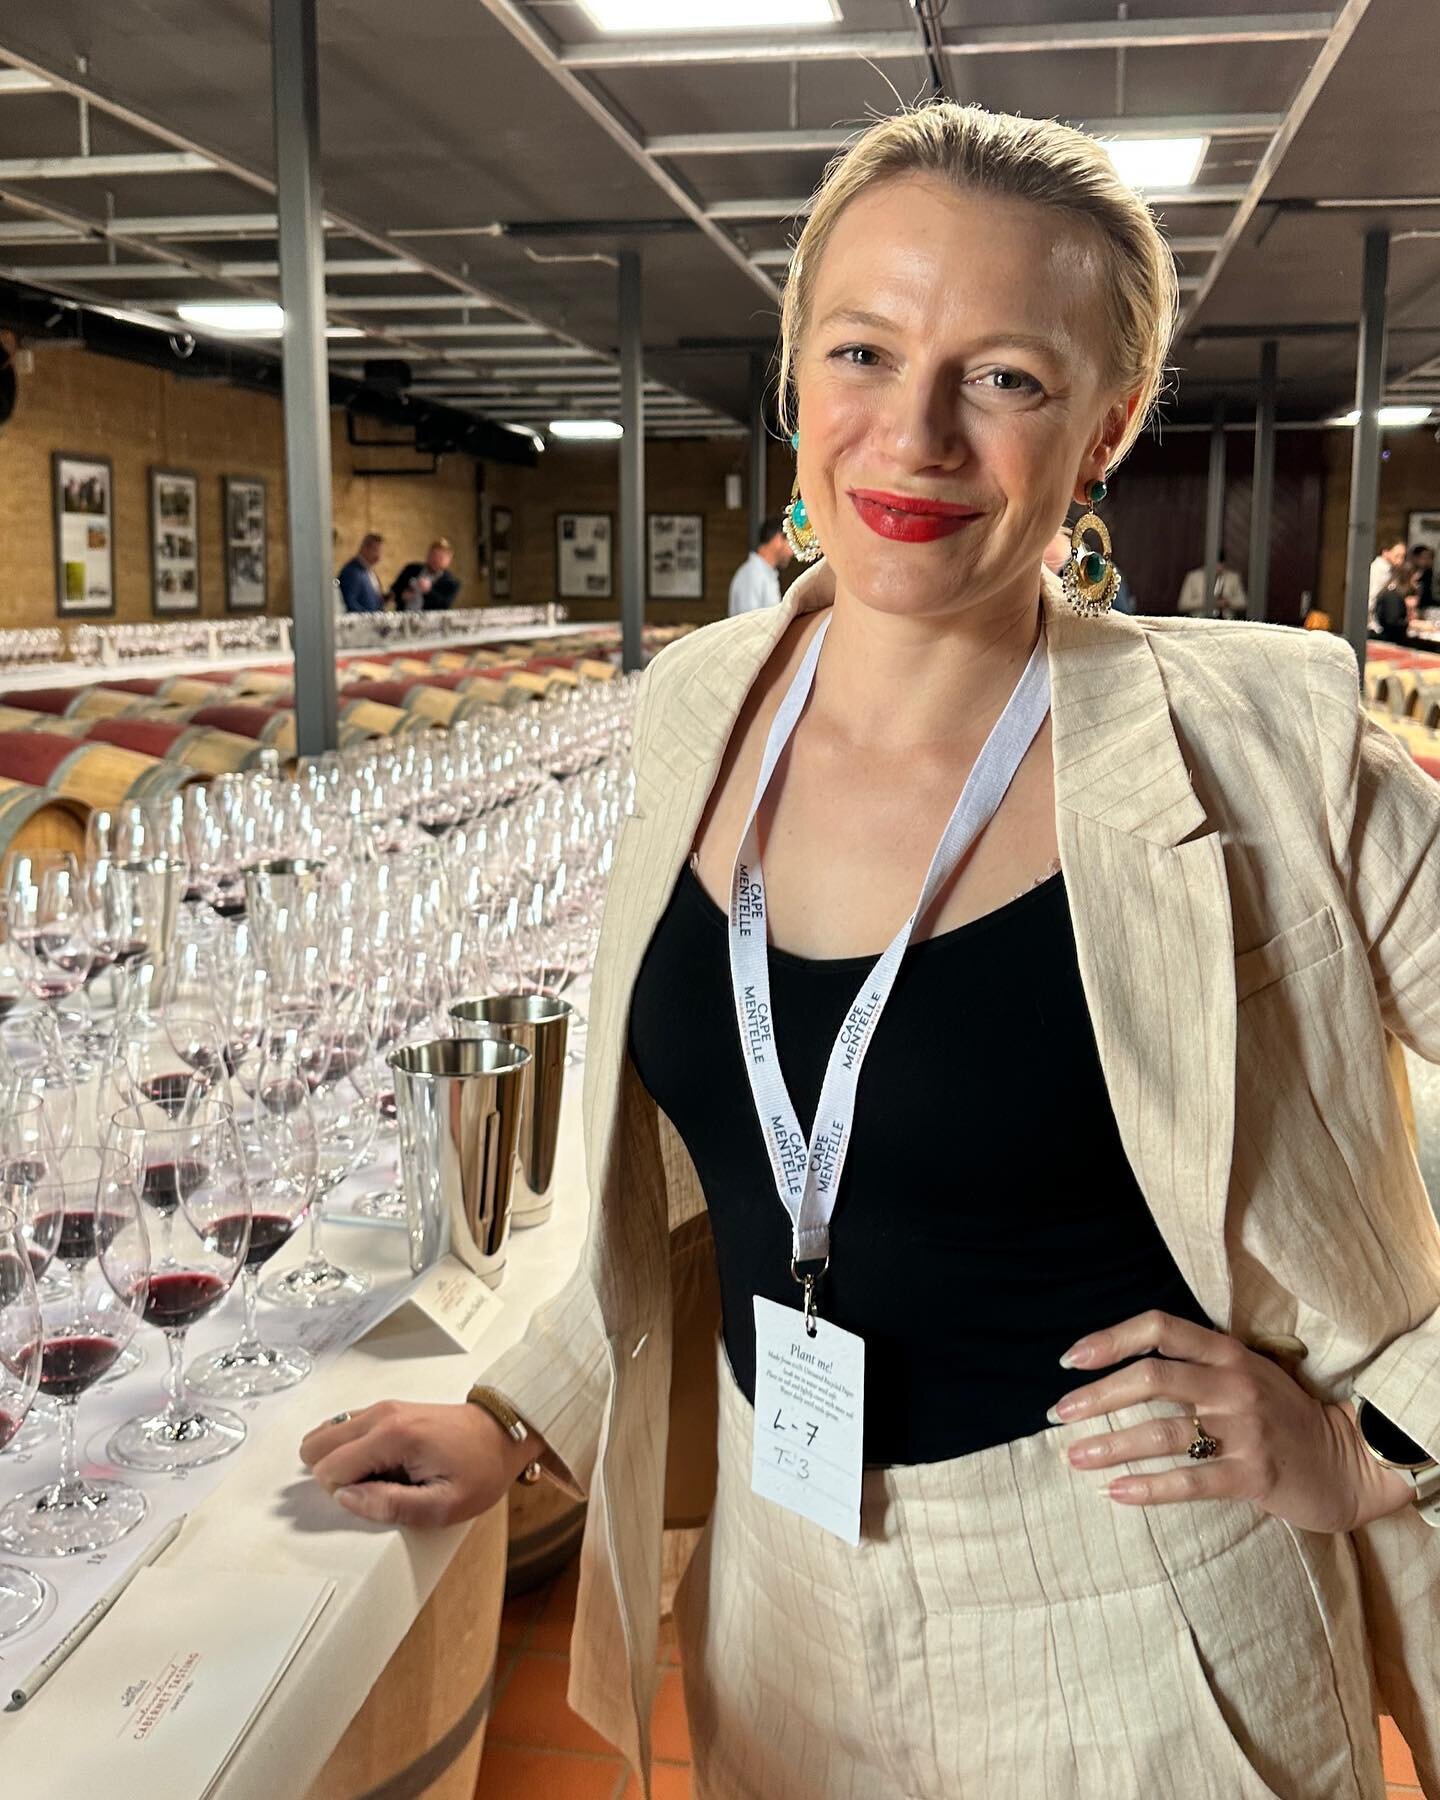 It&rsquo;s been a lovely week of wine. 🍷 The last hurrah was a sublime line up of global Cabernet Sauvignon from the 2020 vintage at the @capementelle International Cabernet Tasting. 

A snapshot in time around some of the greatest Cabernet regions 